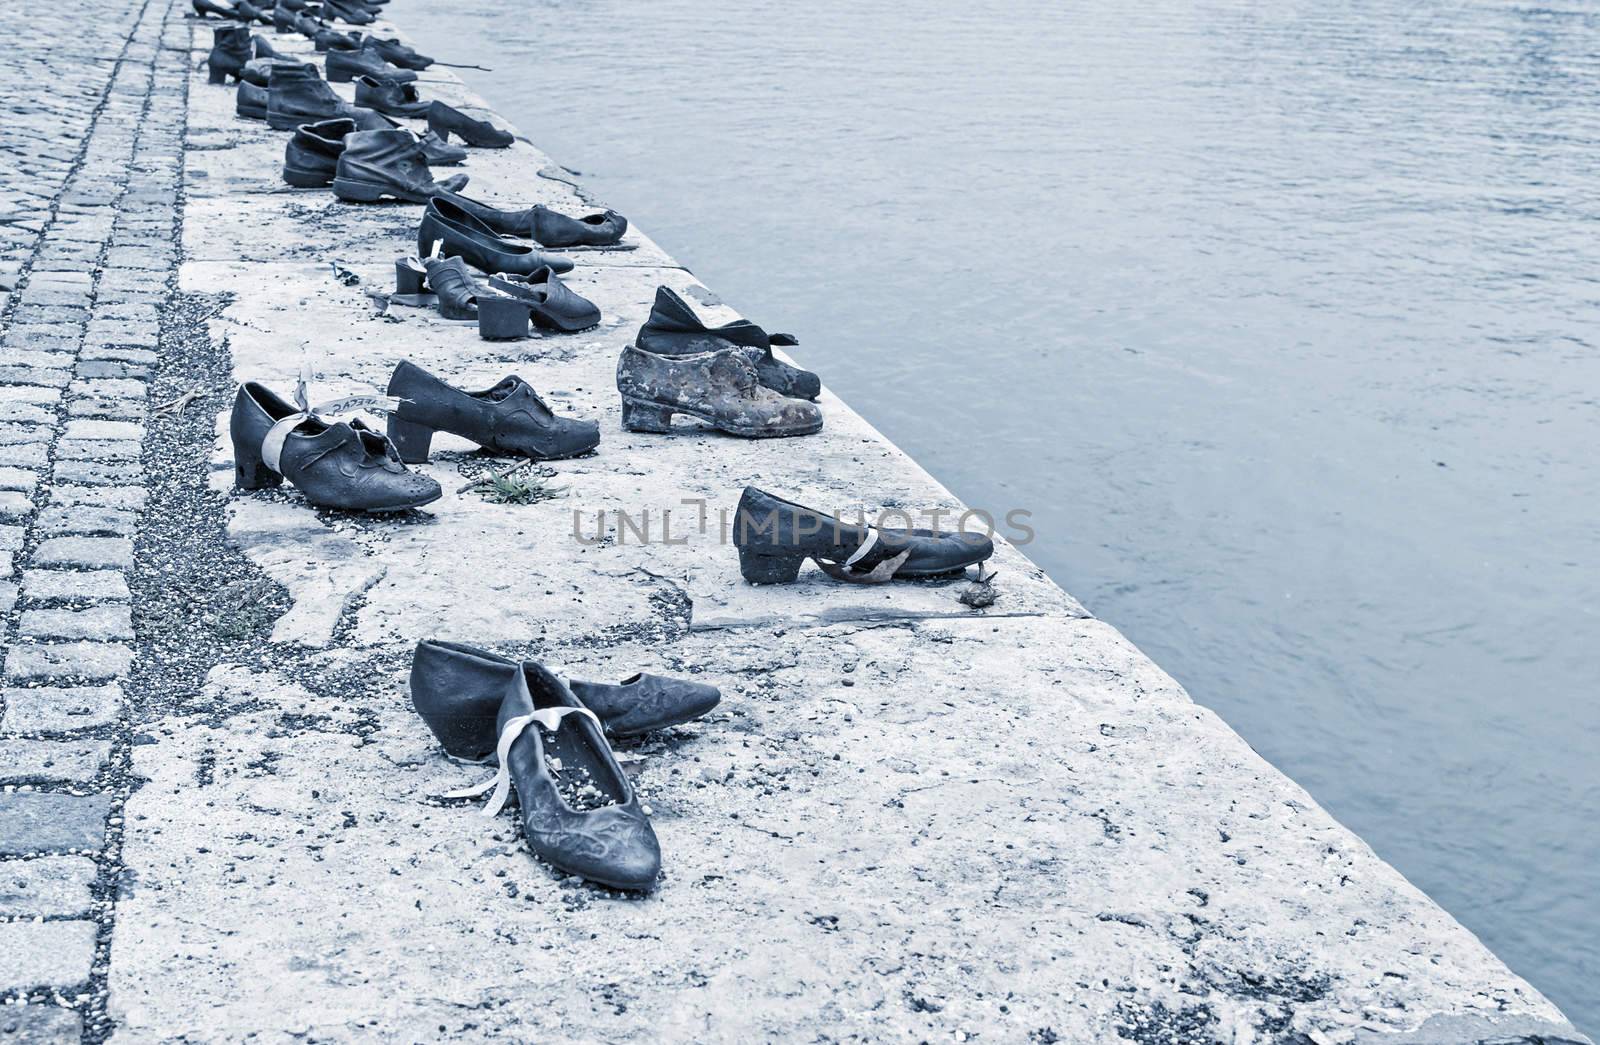 BUDAPEST, HUNGARY - October 12: Iron shoes memorial to Jewish people executed WW2 in Budapest Hungary on October 12, 2015